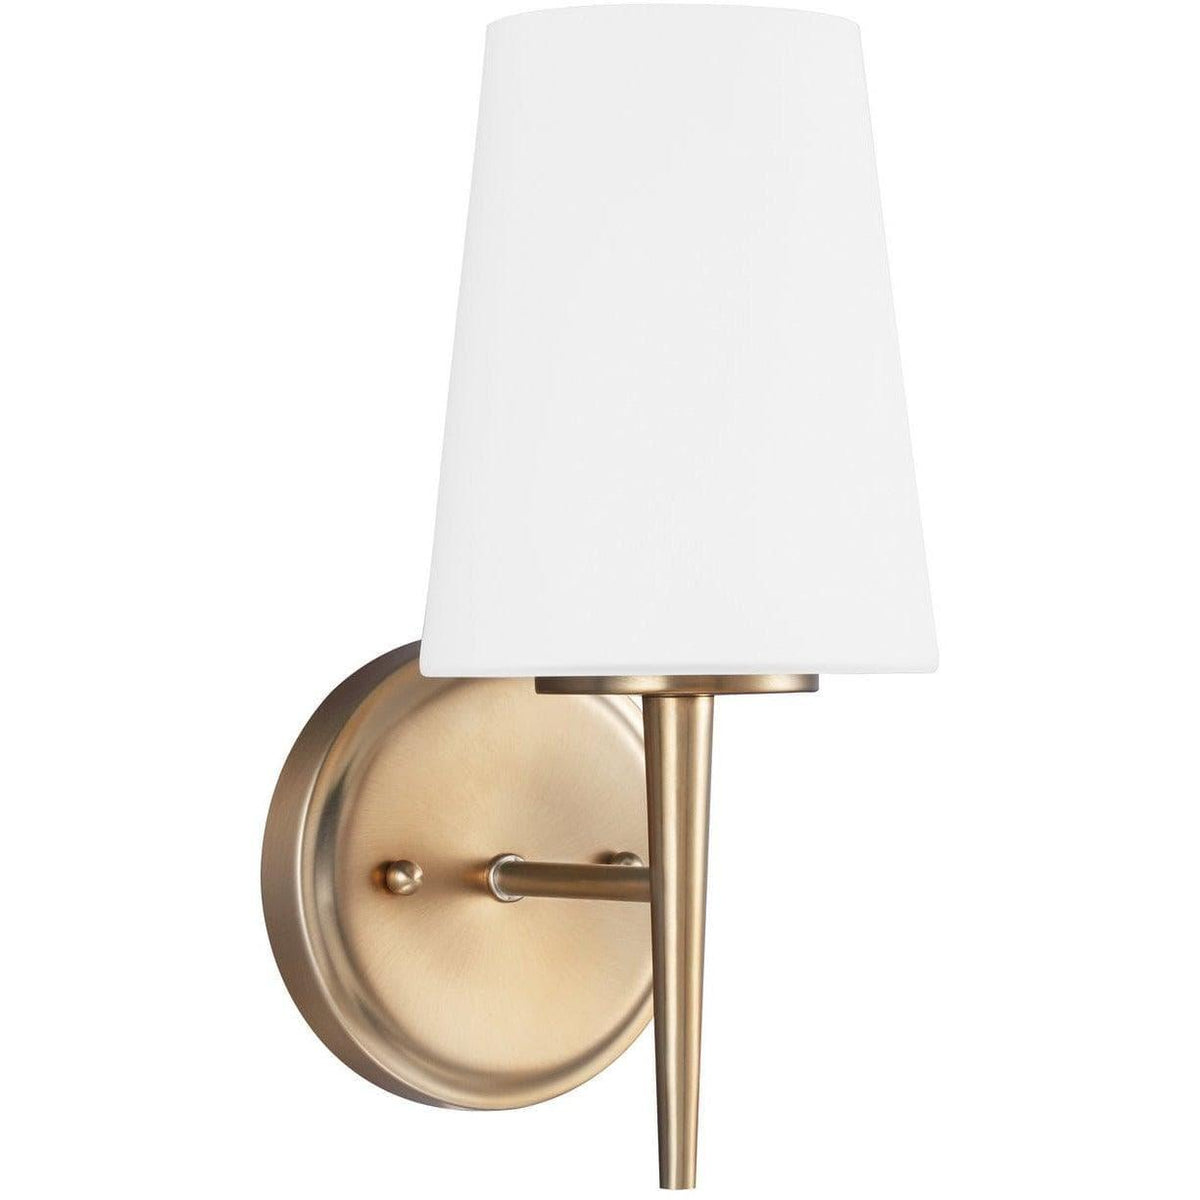 Generation Lighting - Driscoll Wall Sconce - 4140401-848 | Montreal Lighting & Hardware